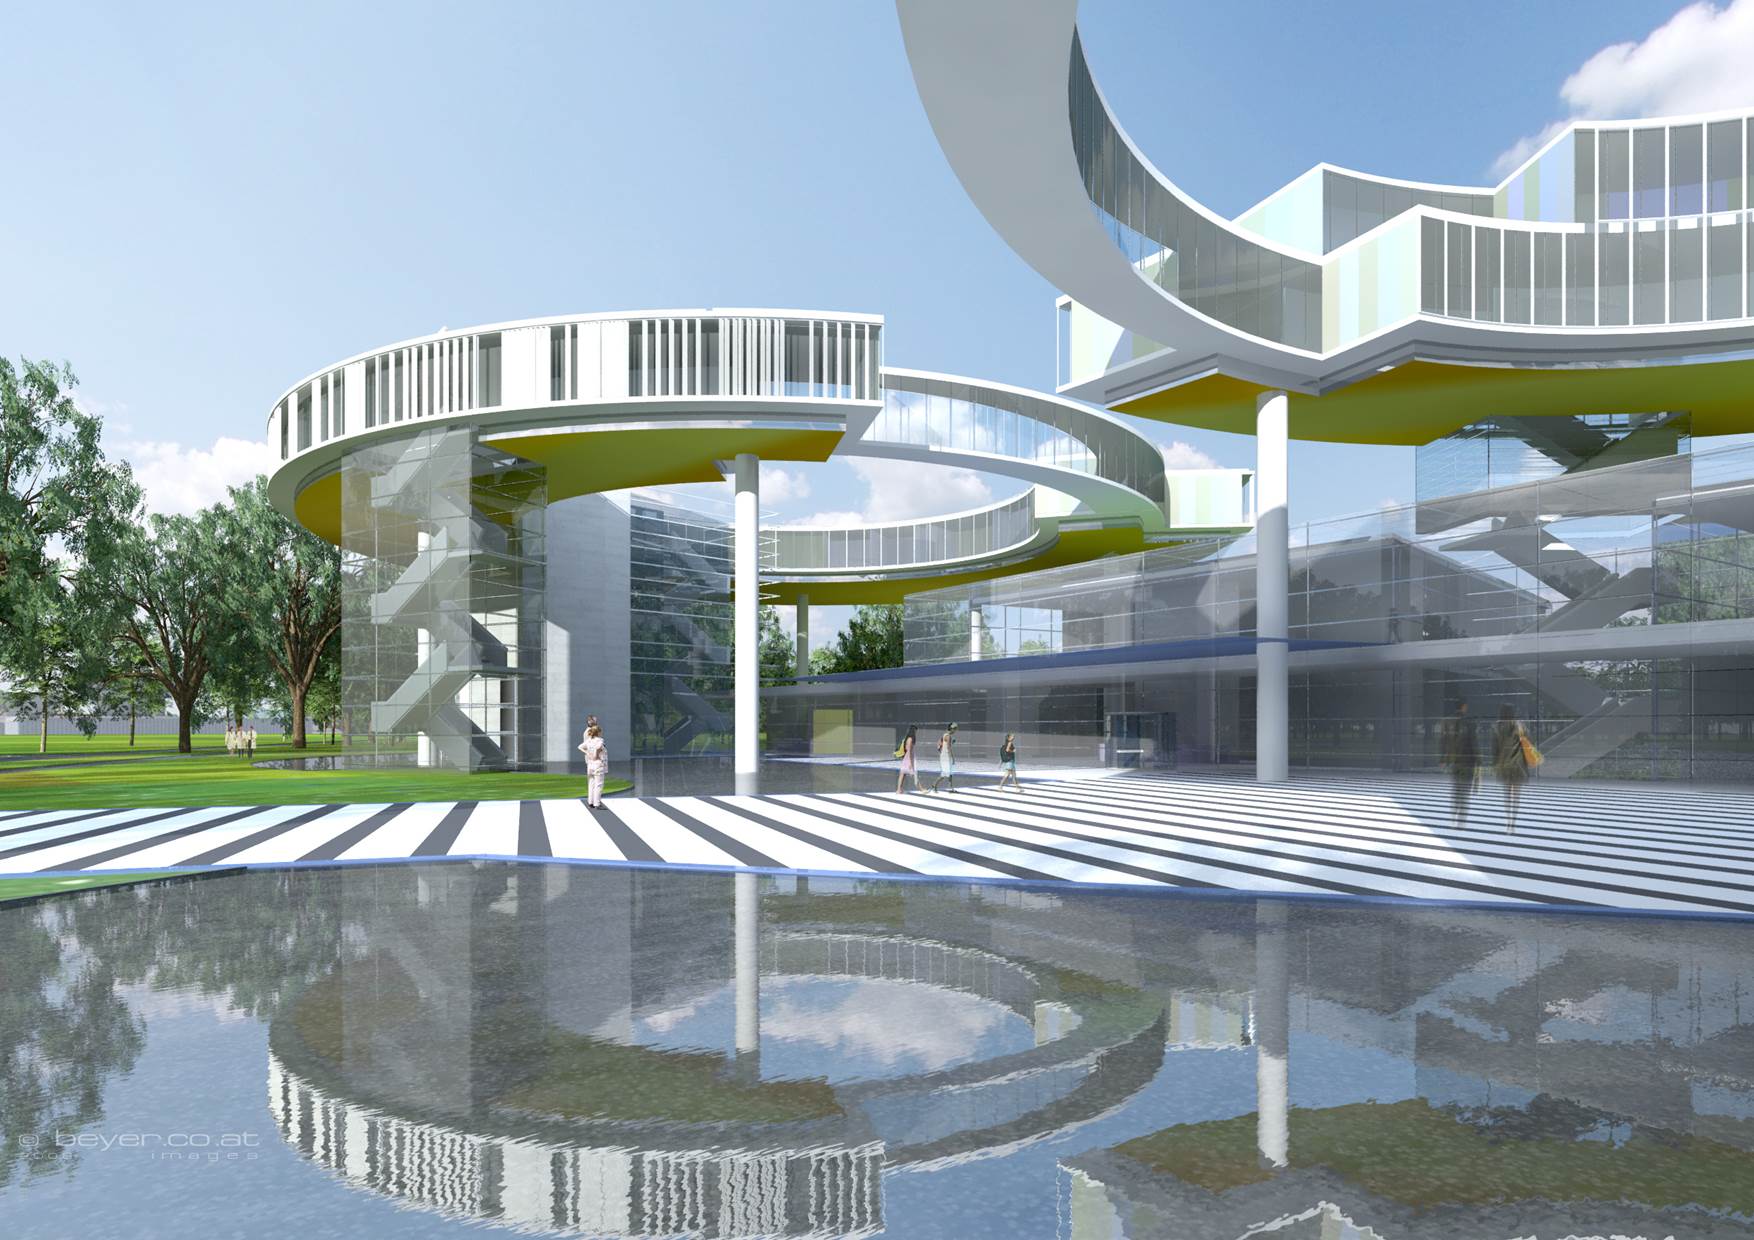 A rendering of the new hospital planned for Vilnius, Lithuania.